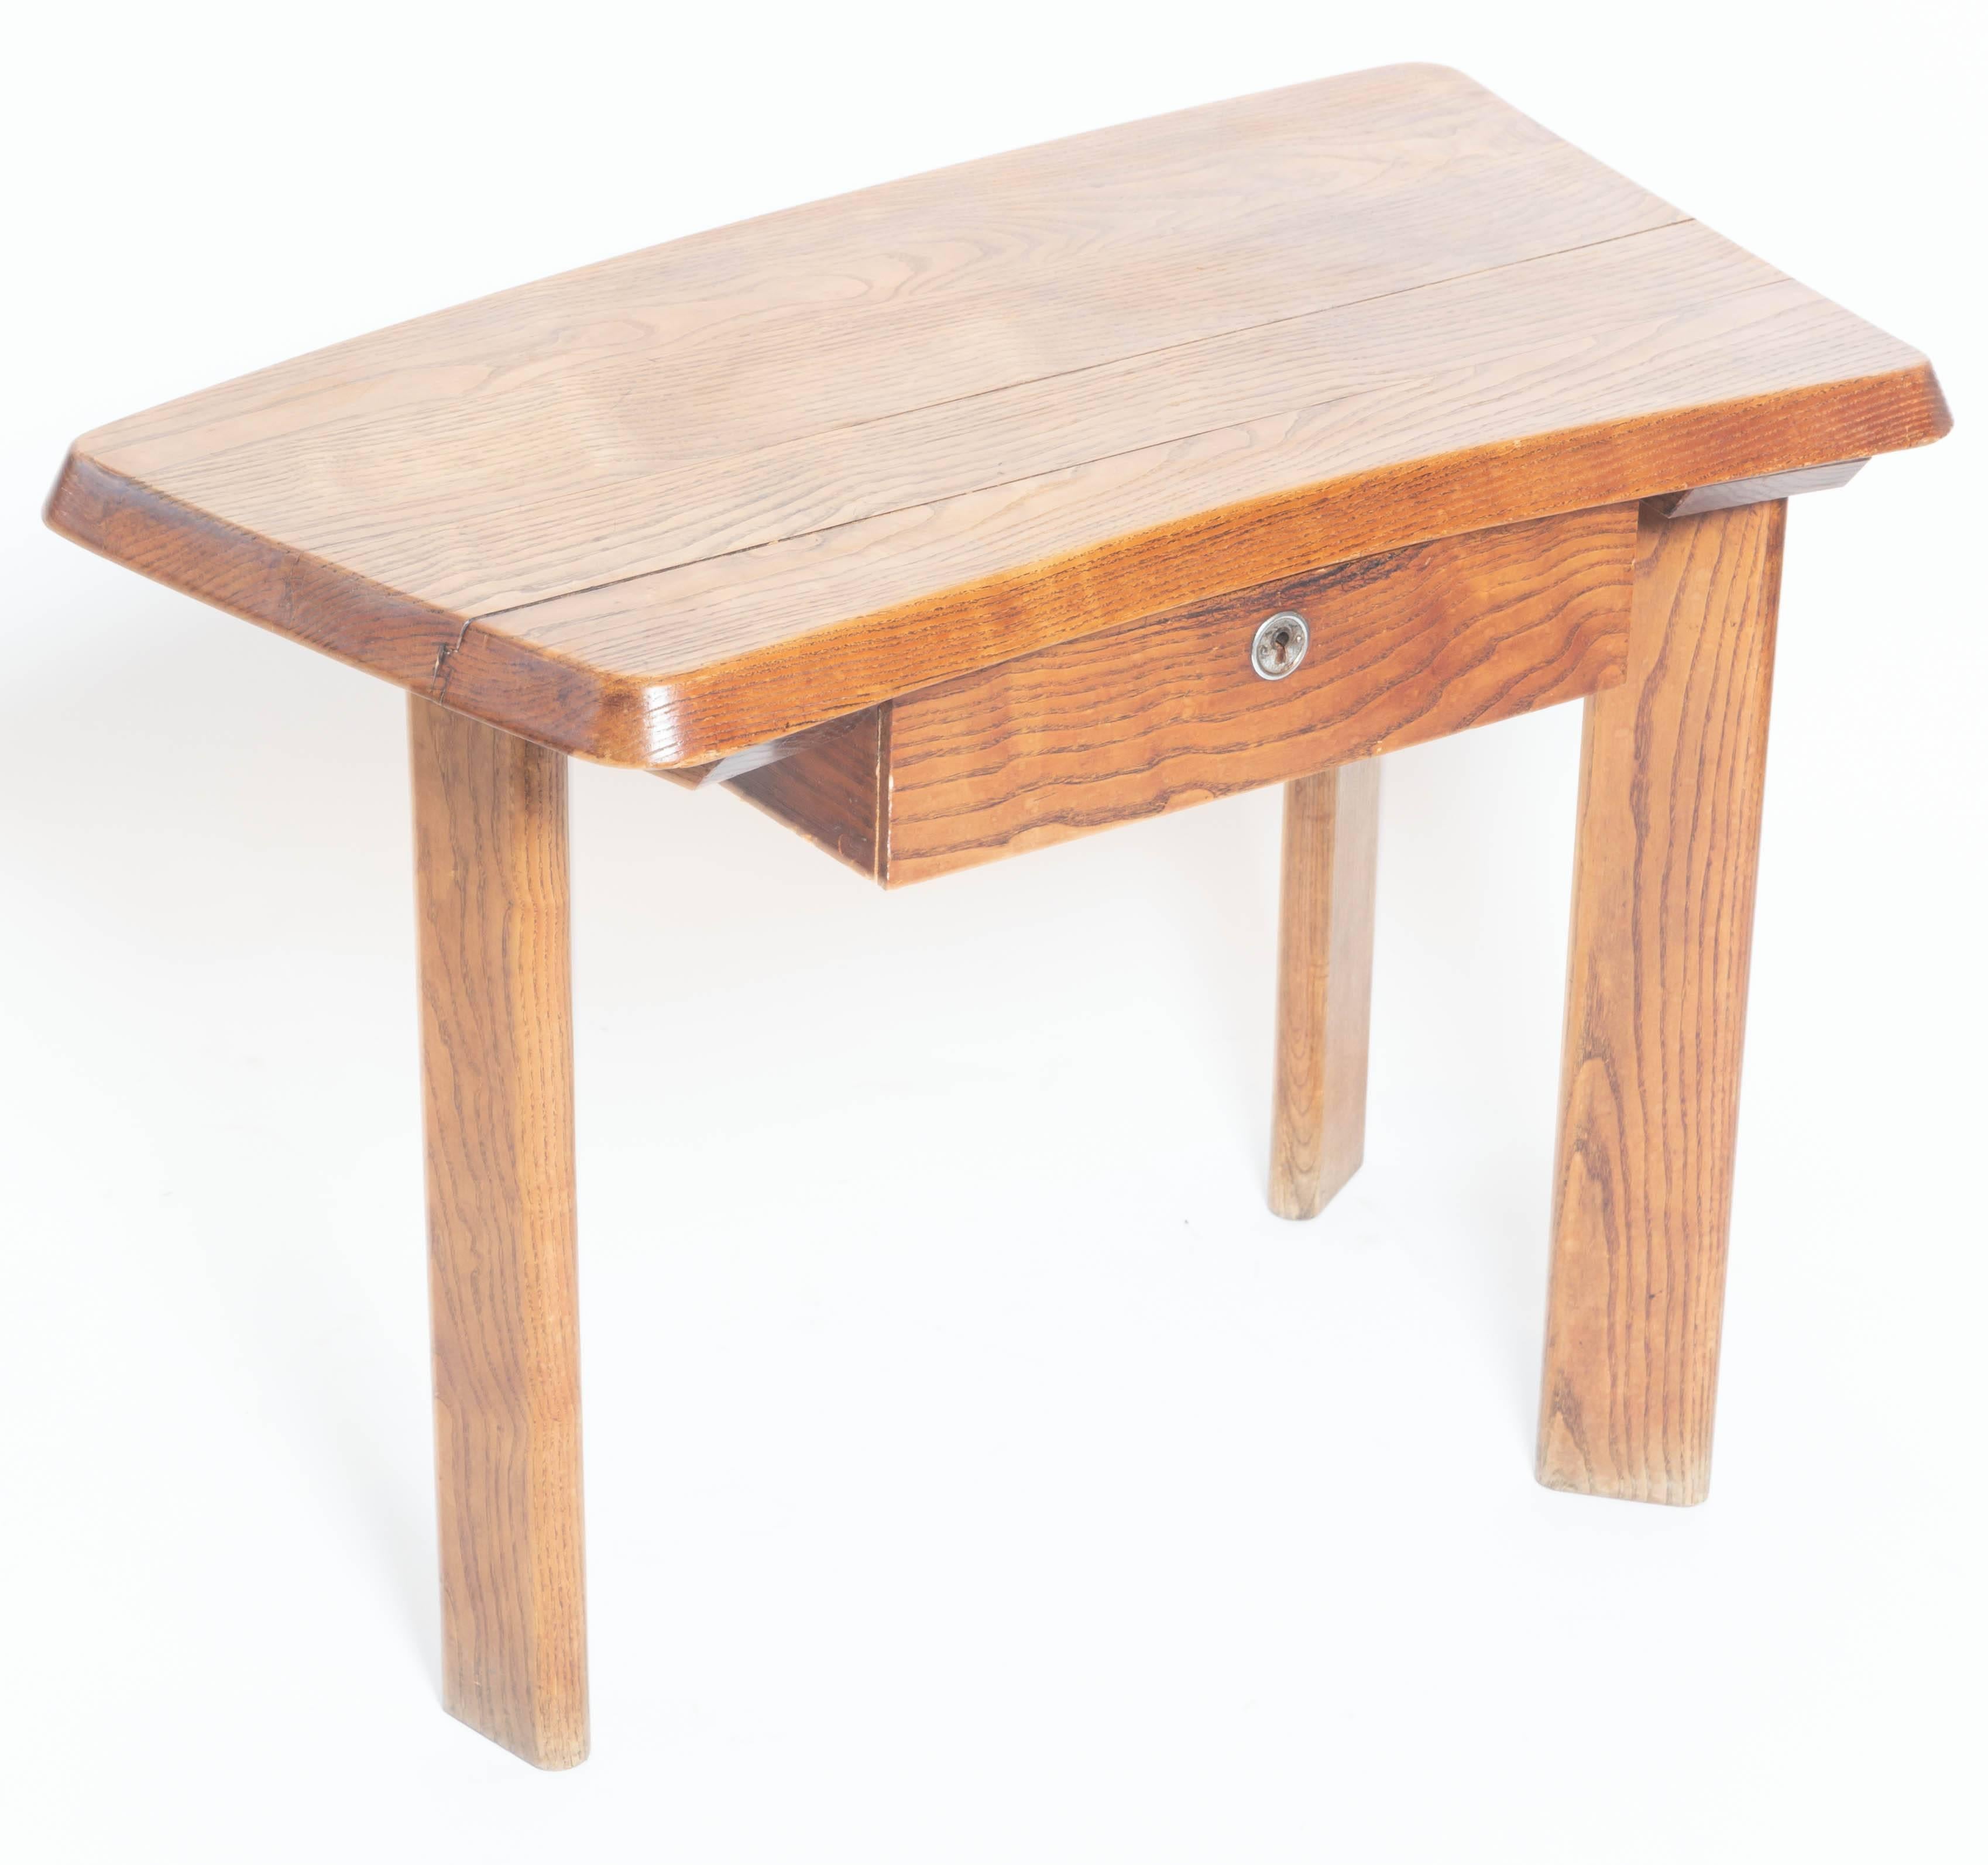 Three-Legged Wooden Oak Table with Drawer, in the Manner of Charlotte Perriand 2